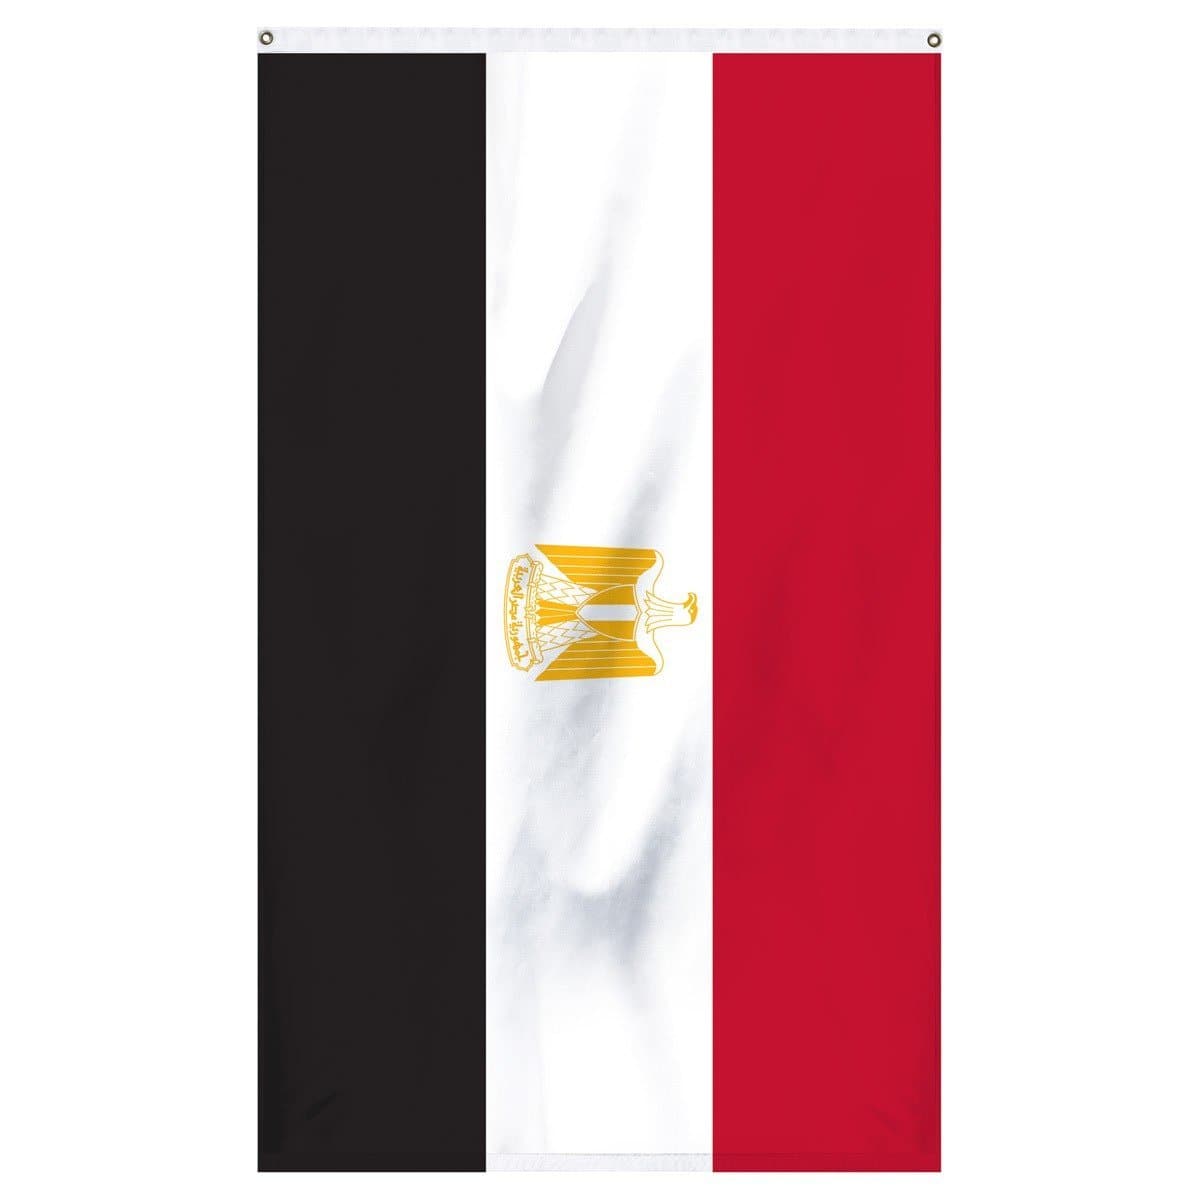 The national flag of Egypt for sale to fly on flagpoles